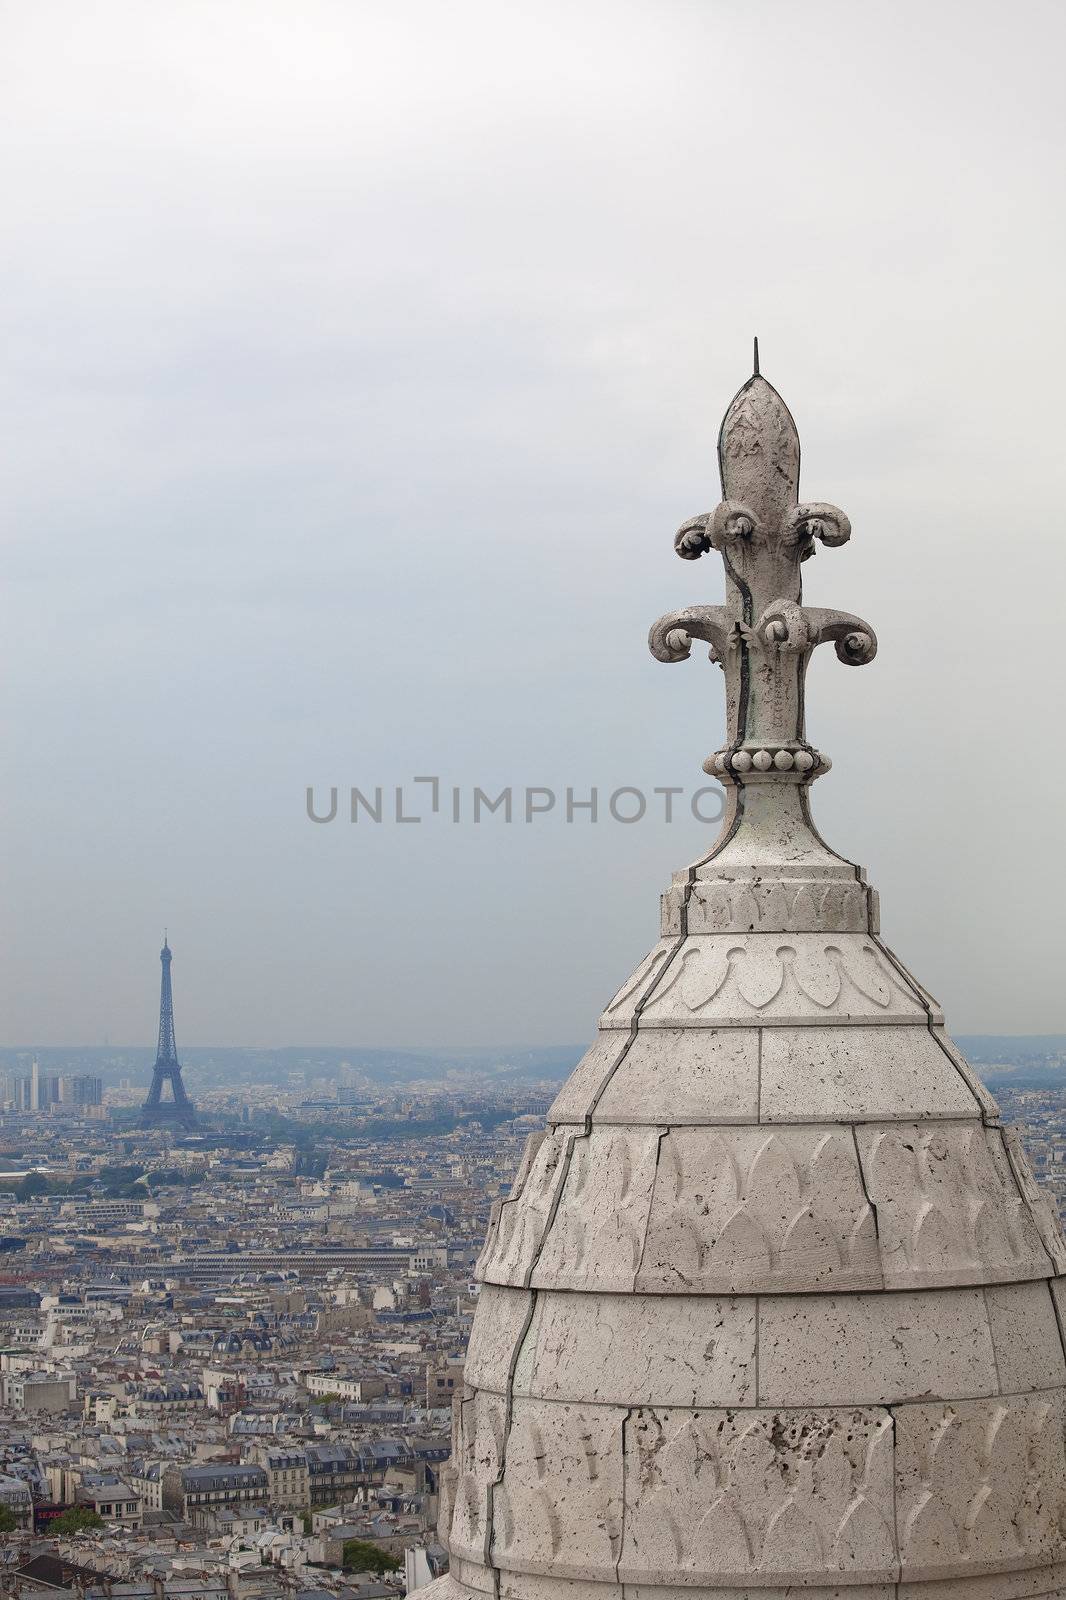 Paris seen from the dome of Sacre Coeur